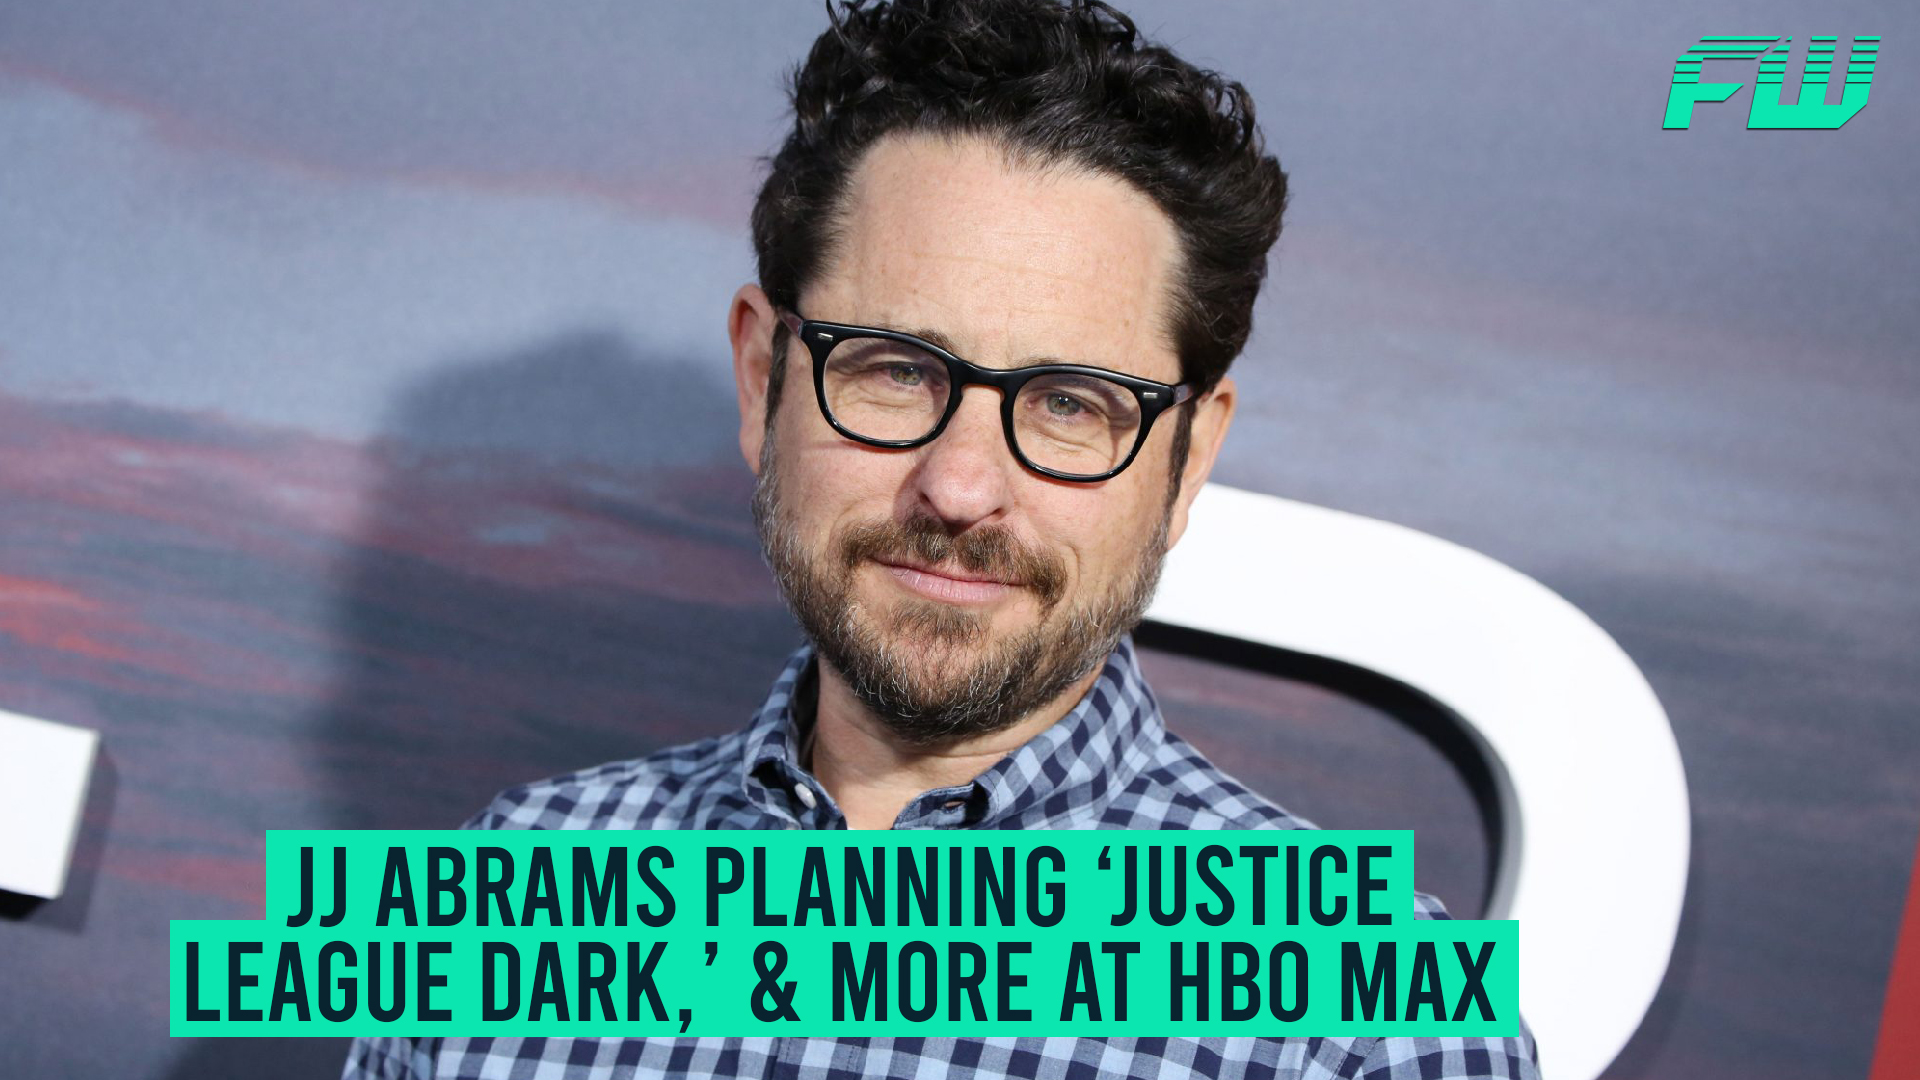 JJ Abrams planning Justice League Dark More at HBO